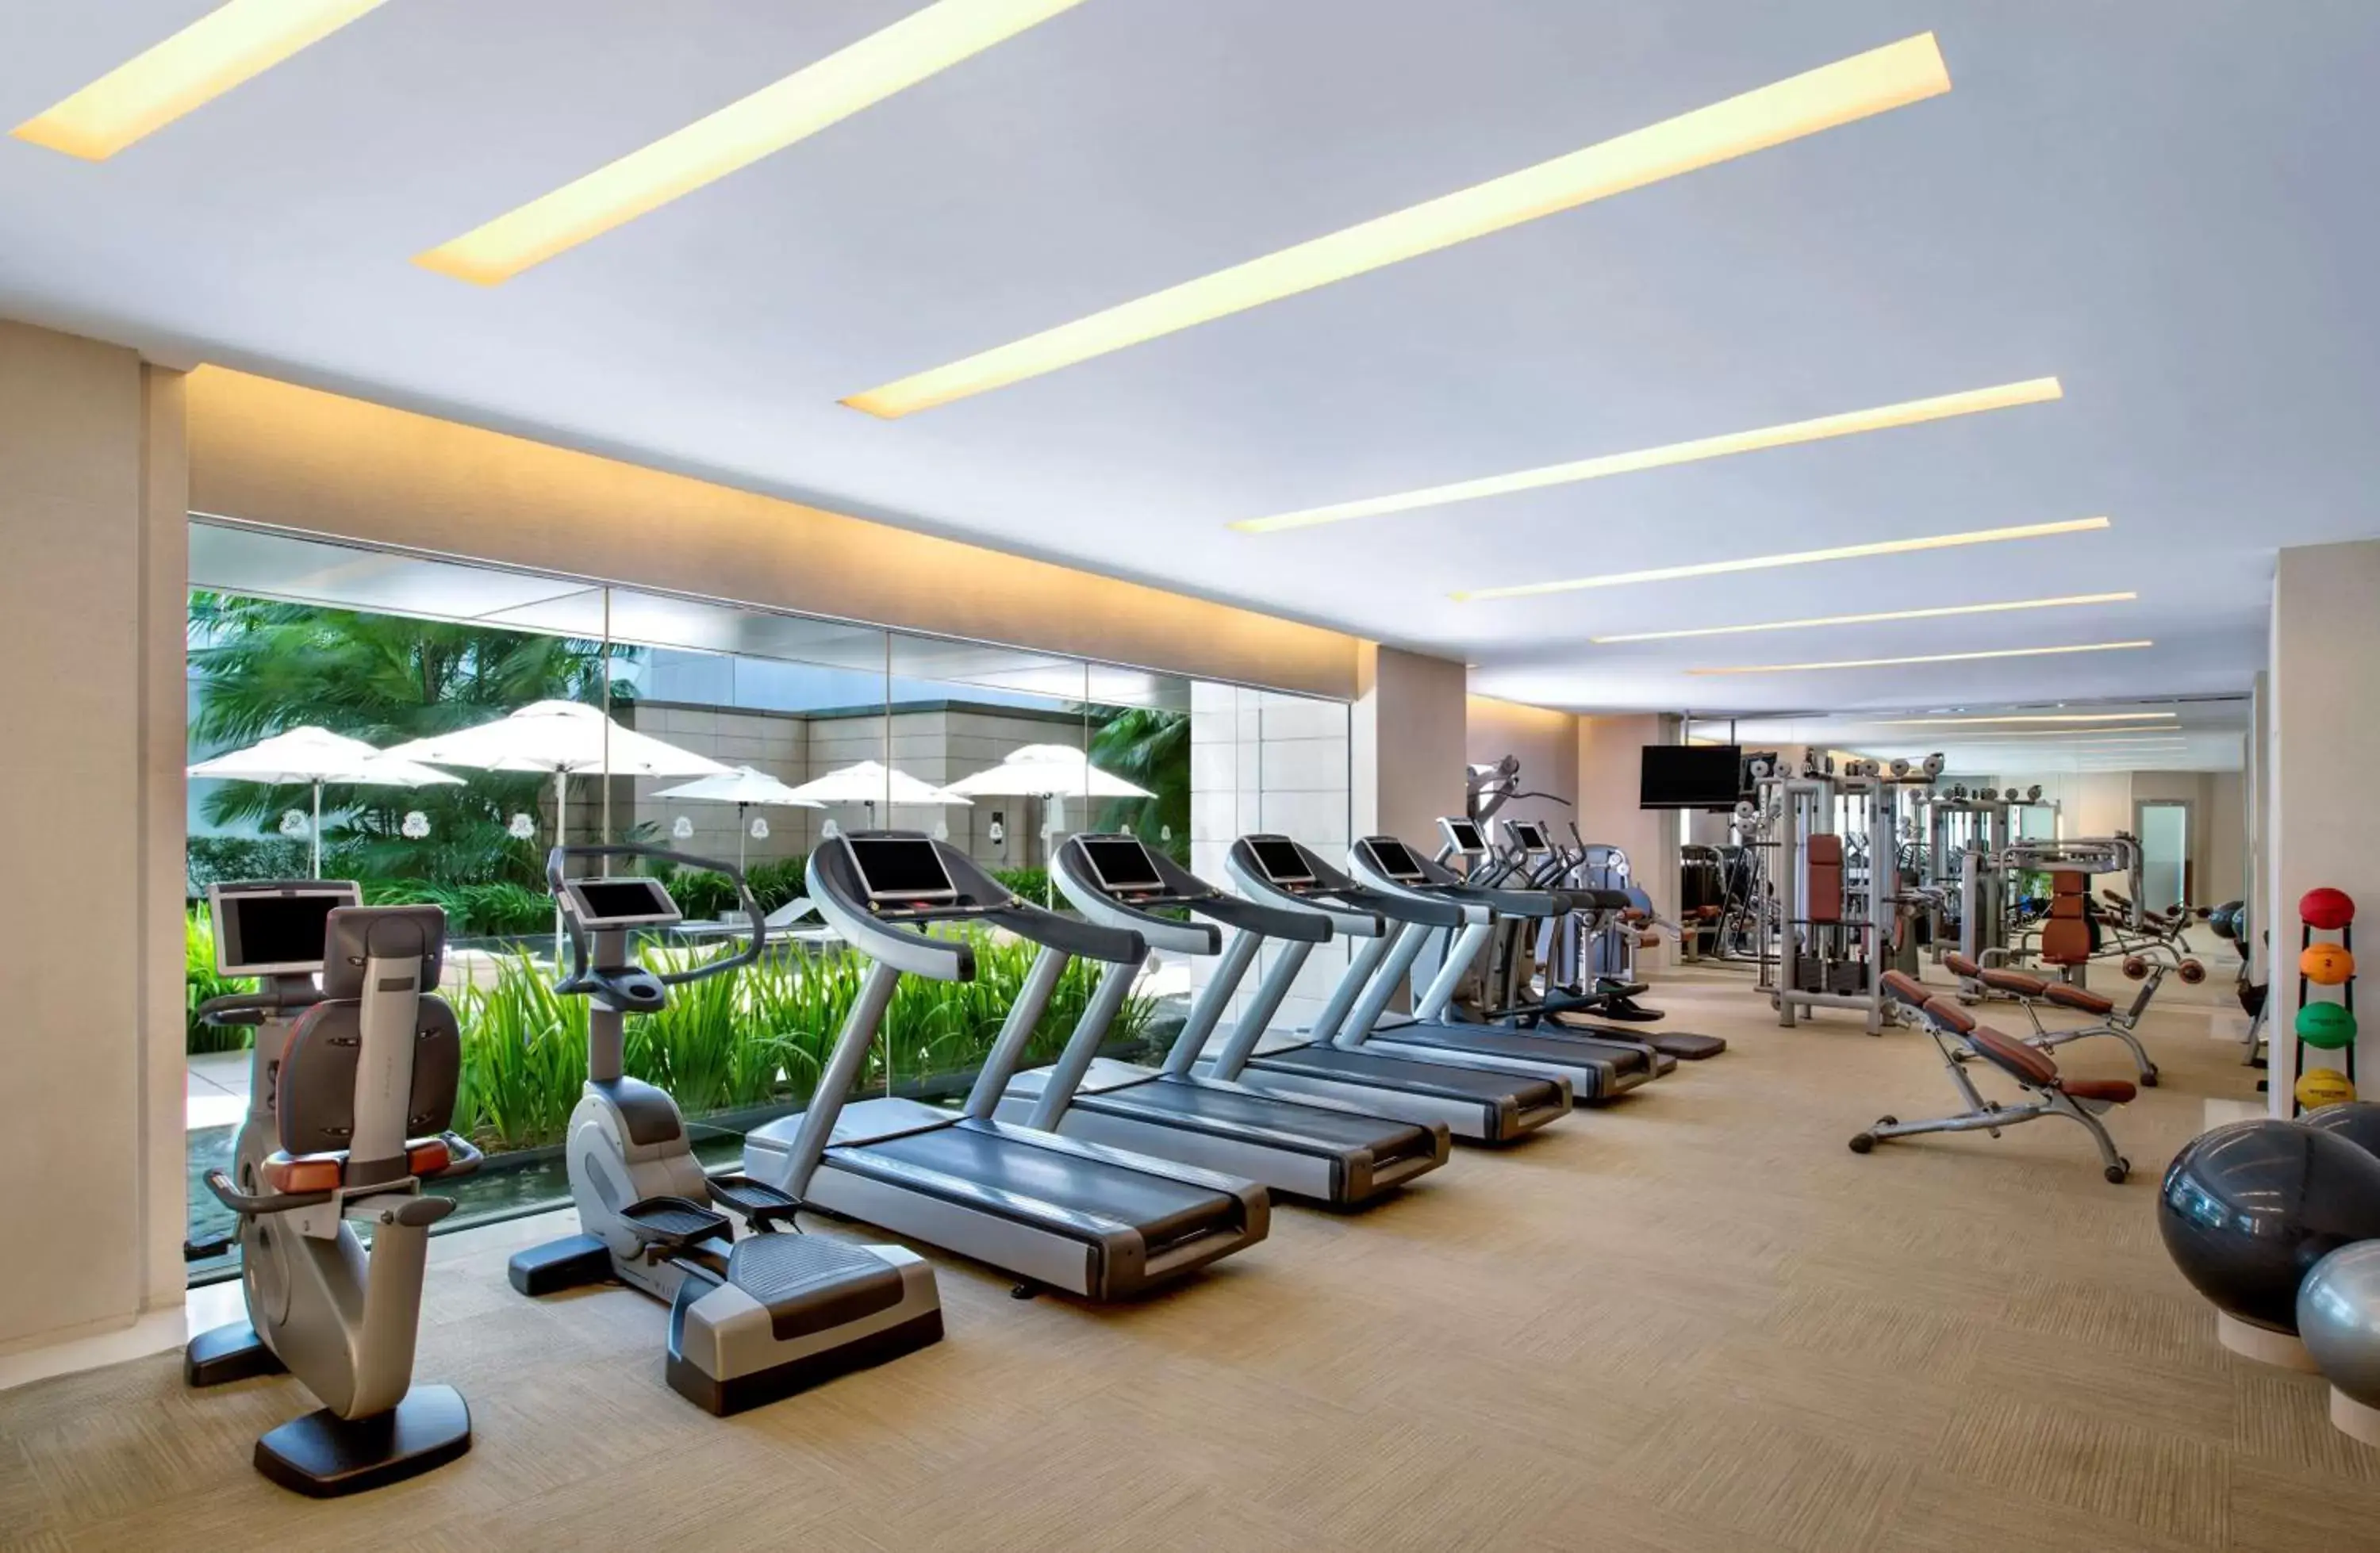 Fitness centre/facilities in The St Regis Singapore